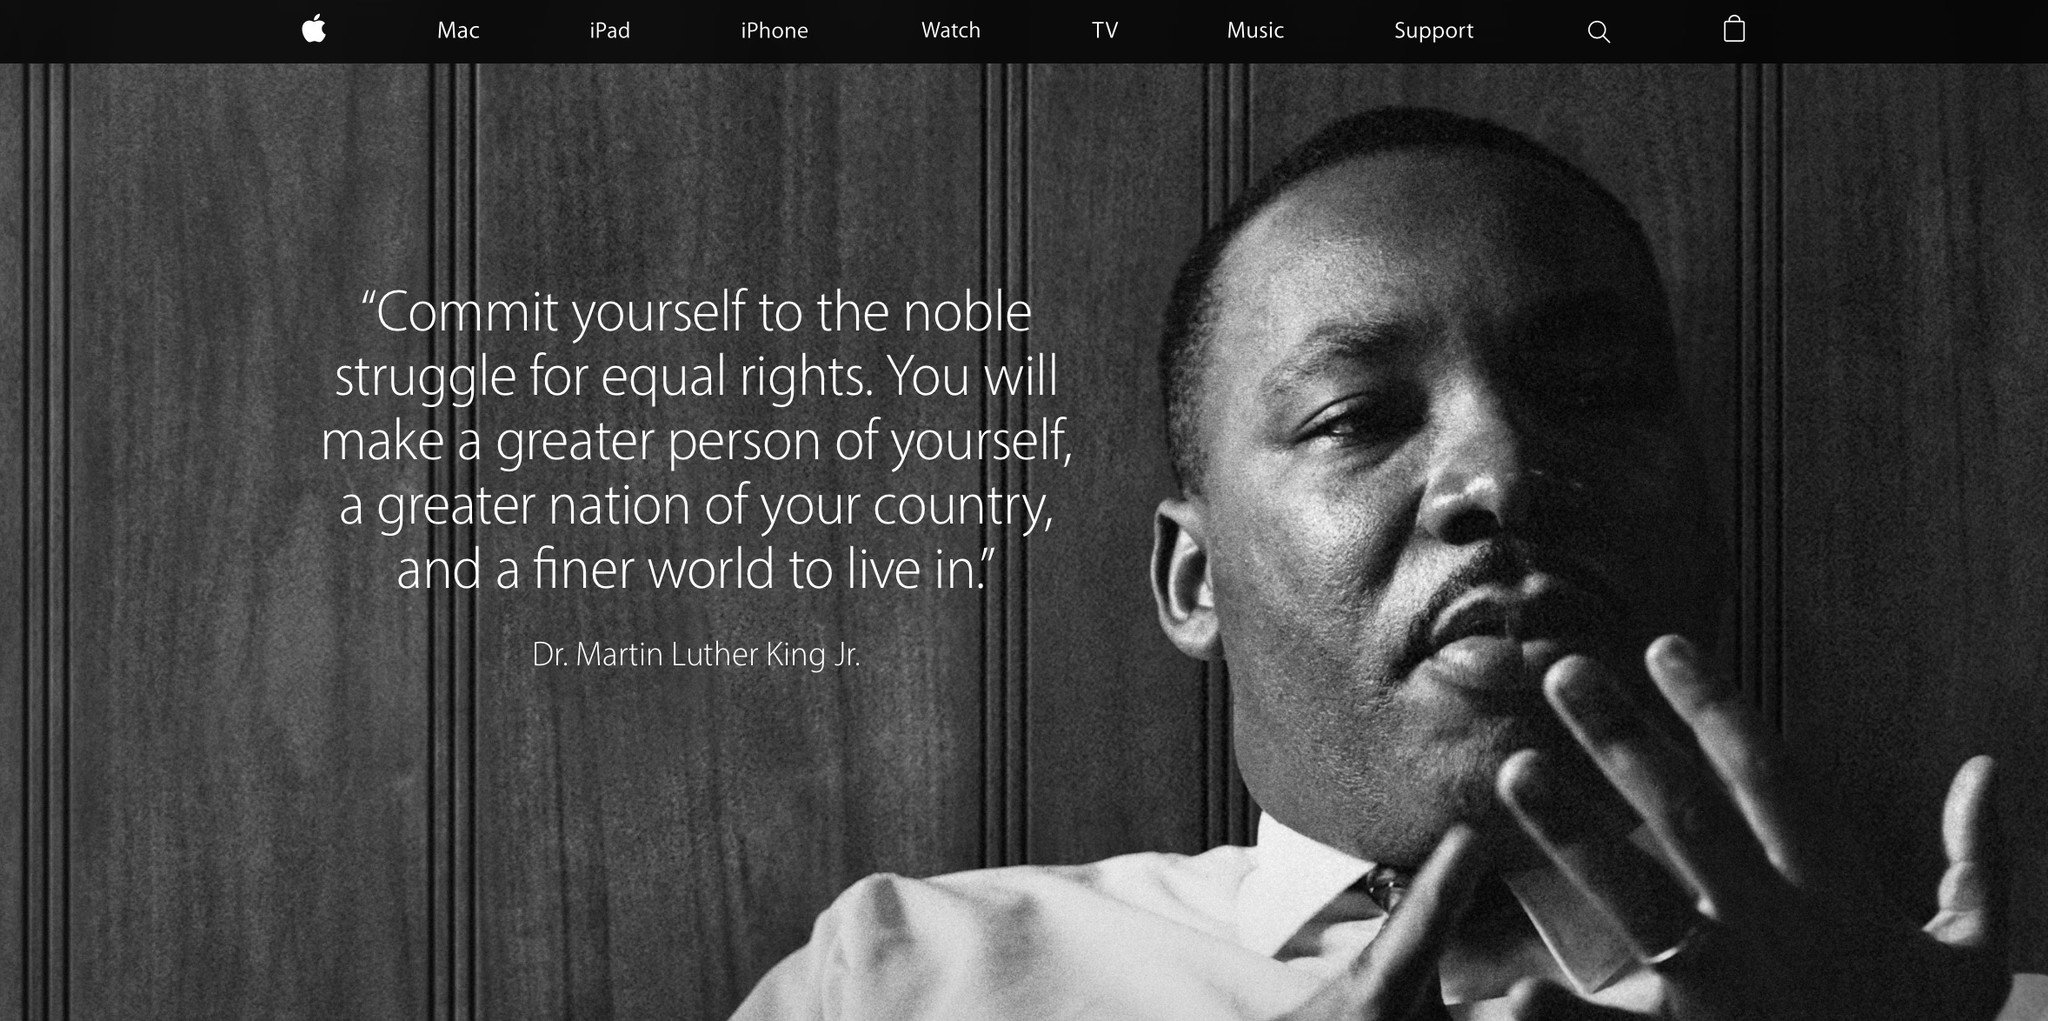 Apple recalls the lessons of Martin Luther King Jr.